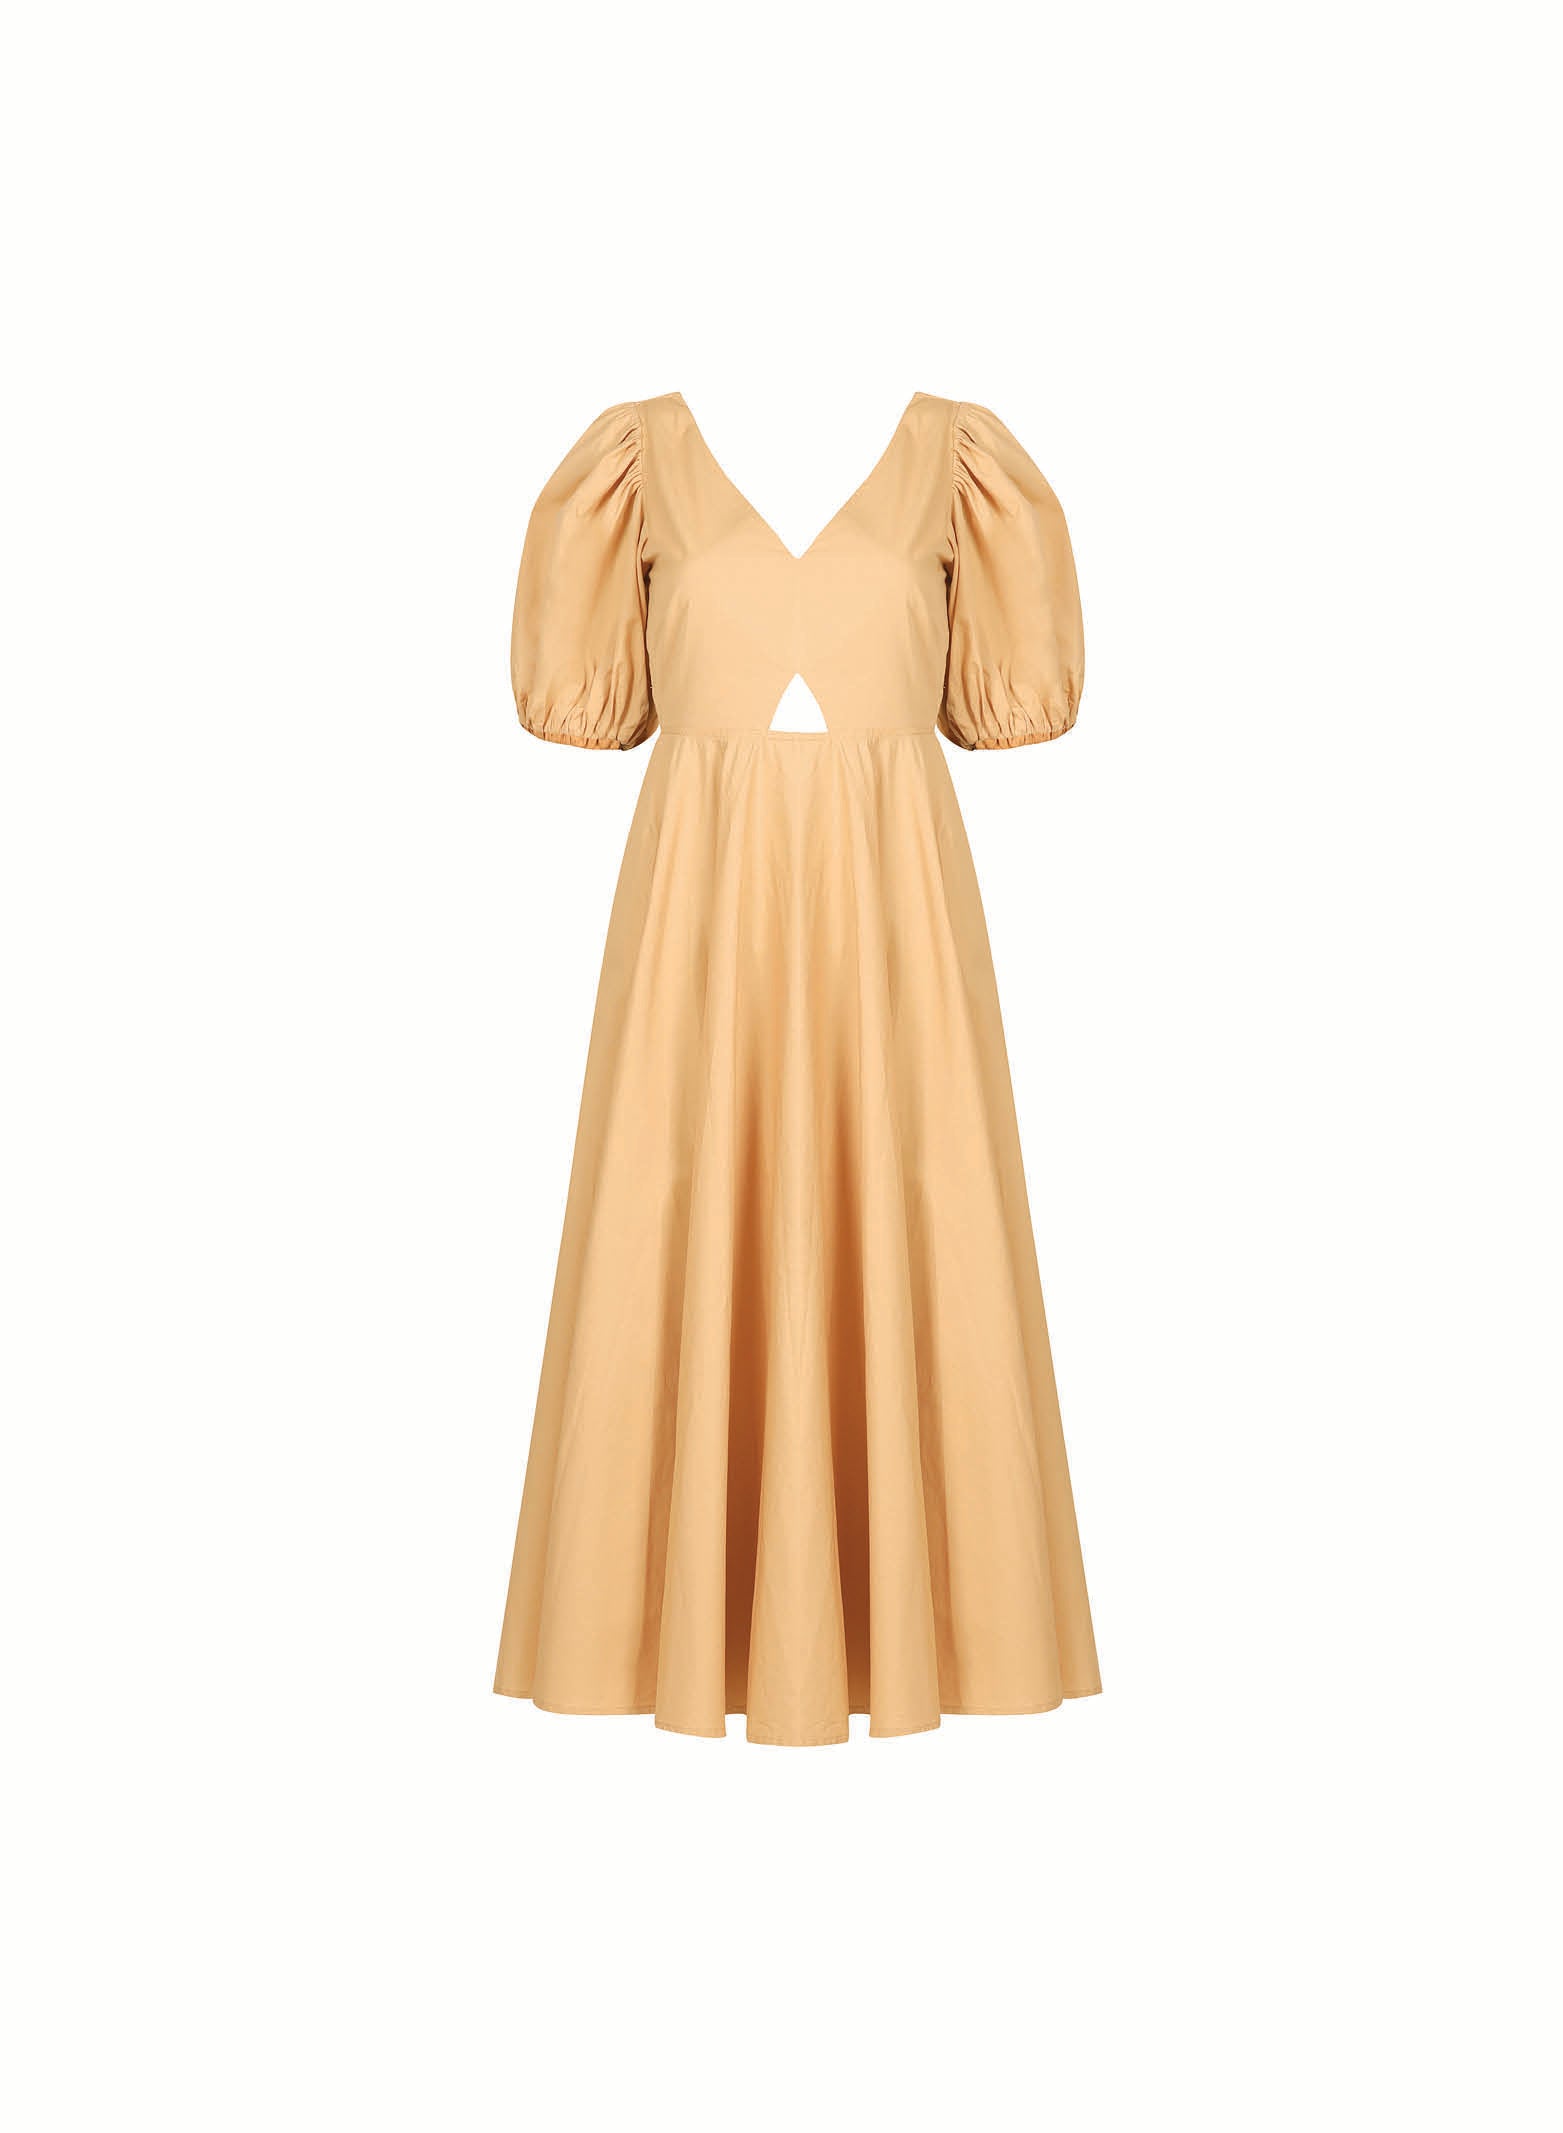 Dune Dress  (60% OFF AT CHECKOUT)